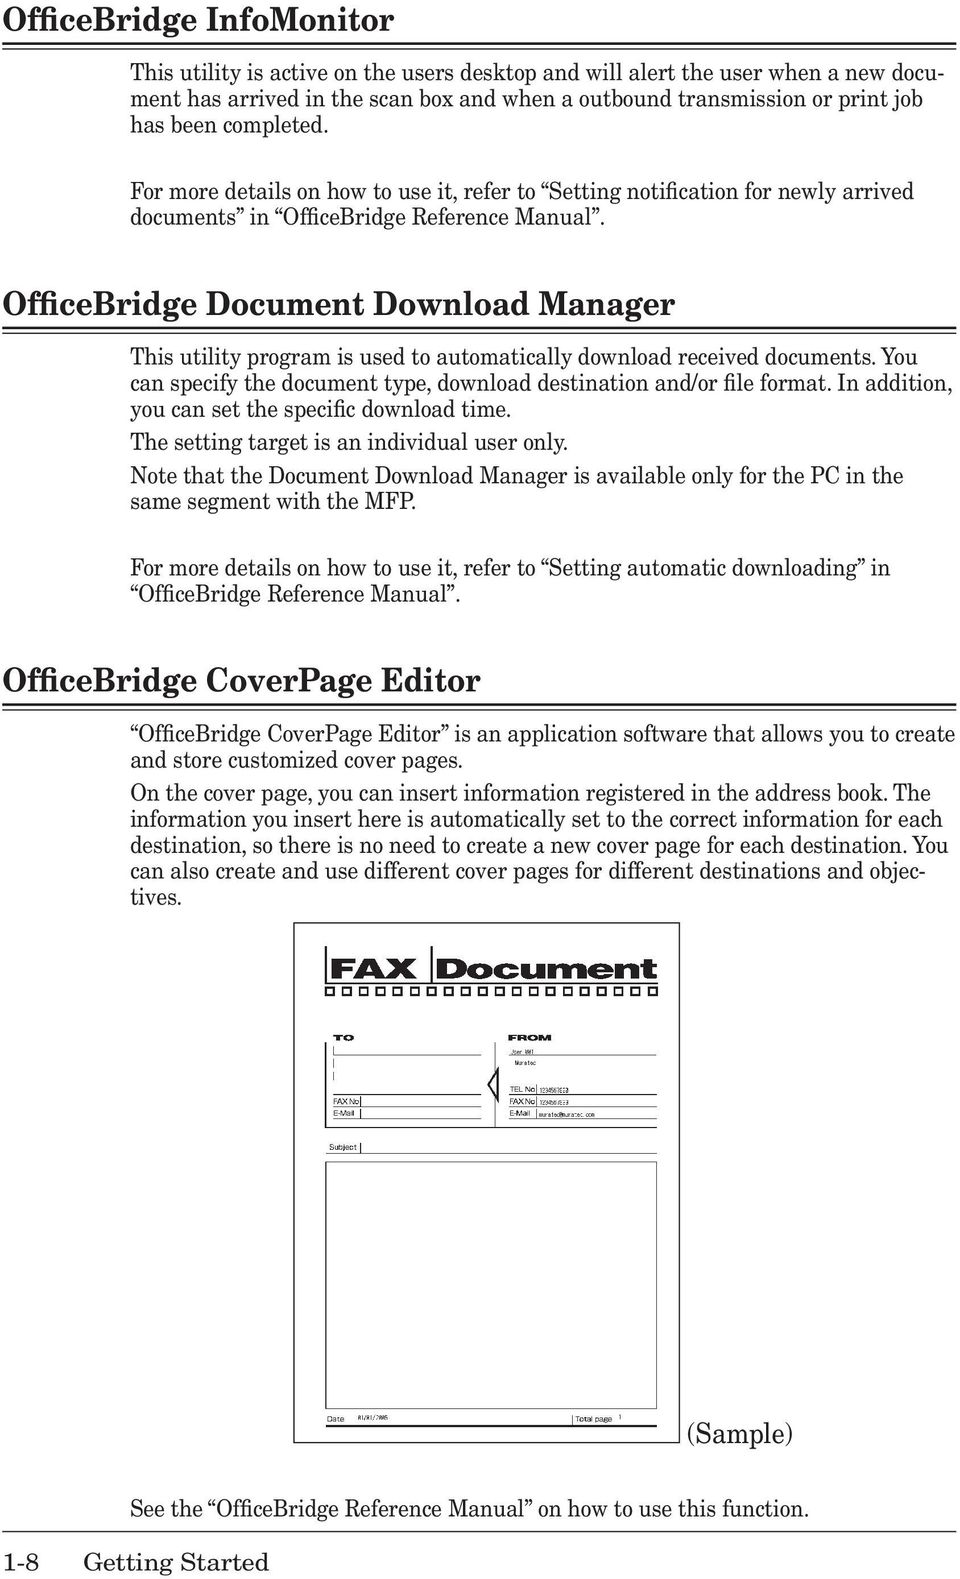 OfficeBridge Document Download Manager This utility program is used to automatically download received documents. You can specify the document type, download destination and/or file format.